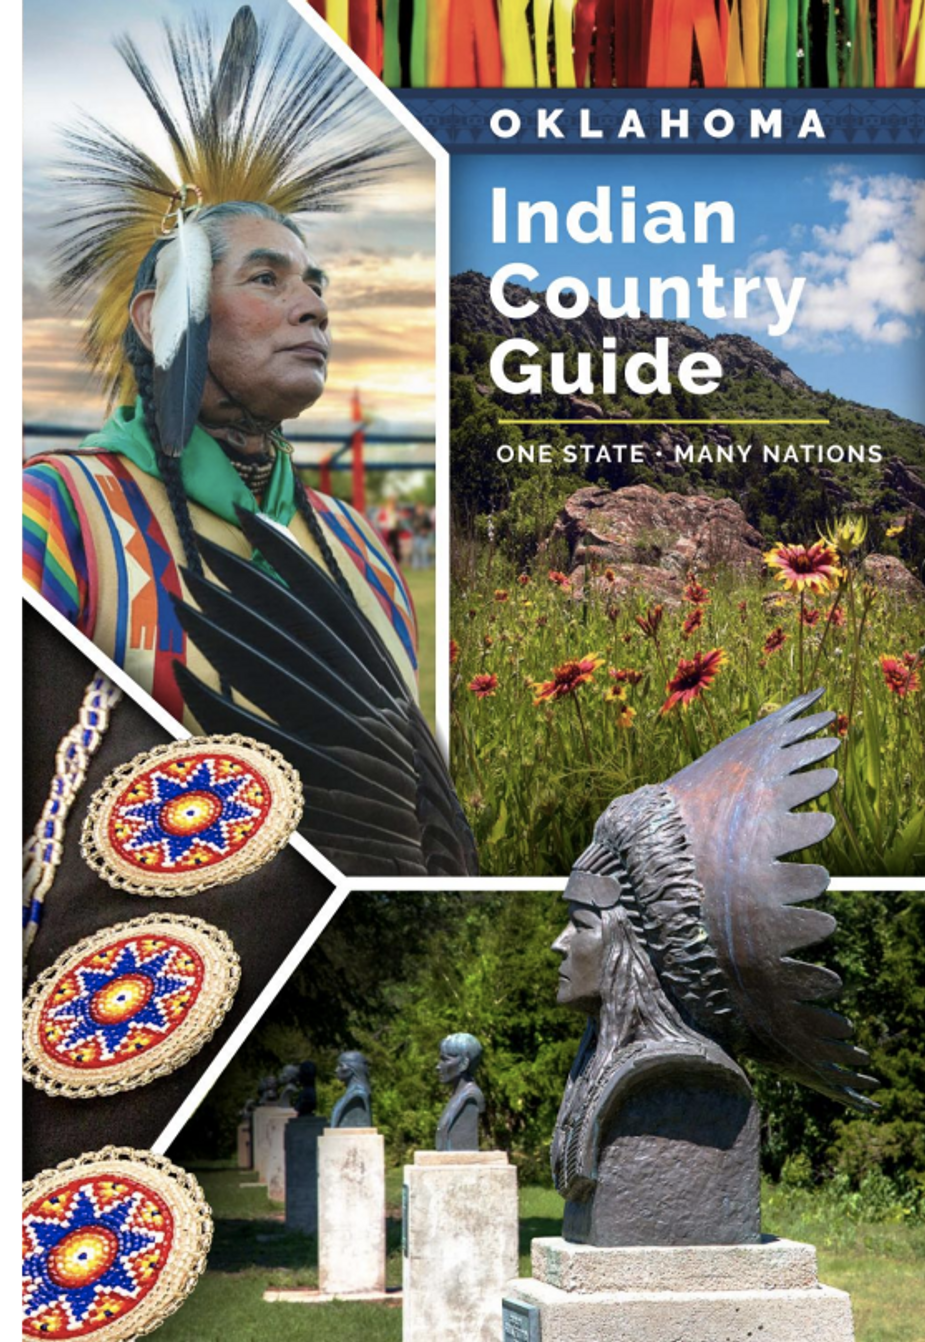 The all-new Indian Country Guide is now available.